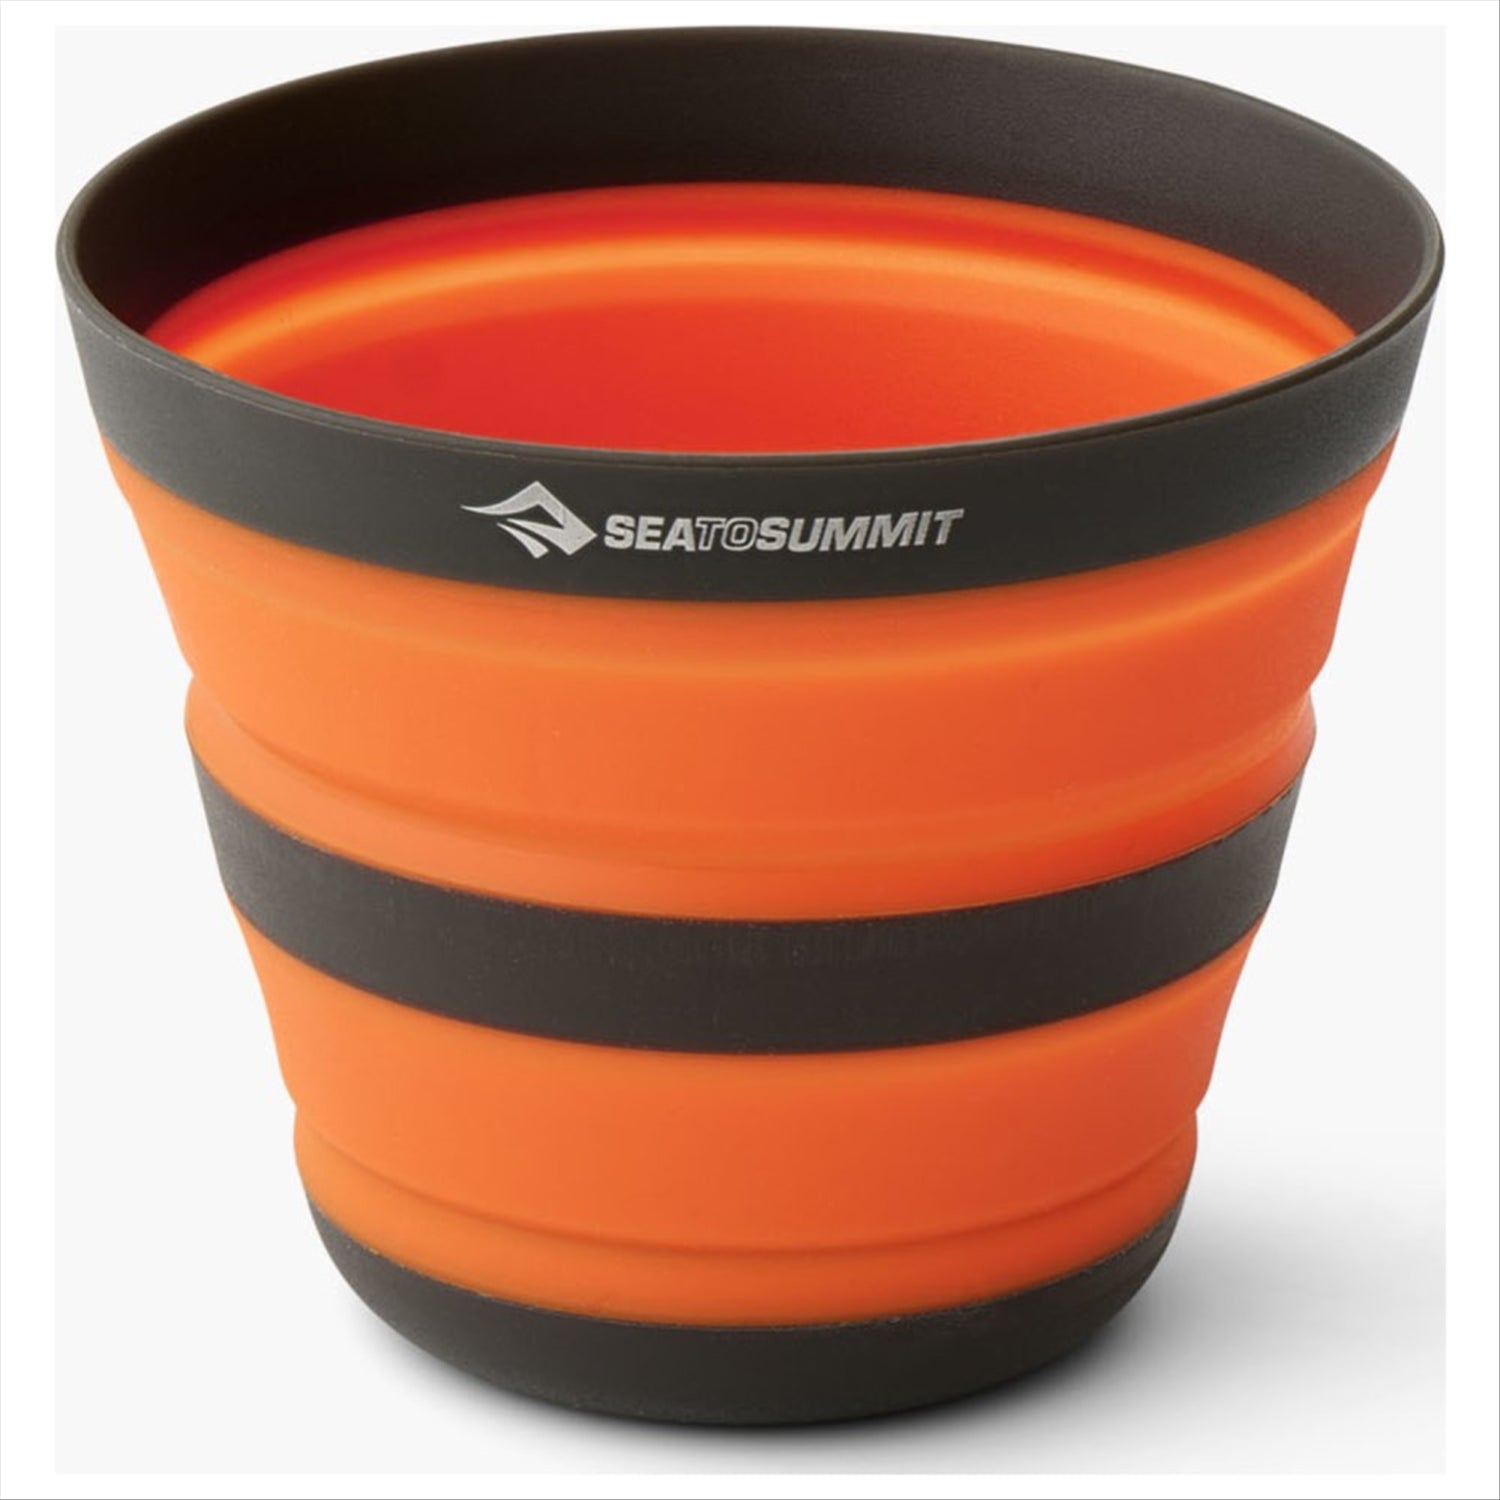 Sea to Summit Sea To Summit Frontier Ultralight Collapsible Cup